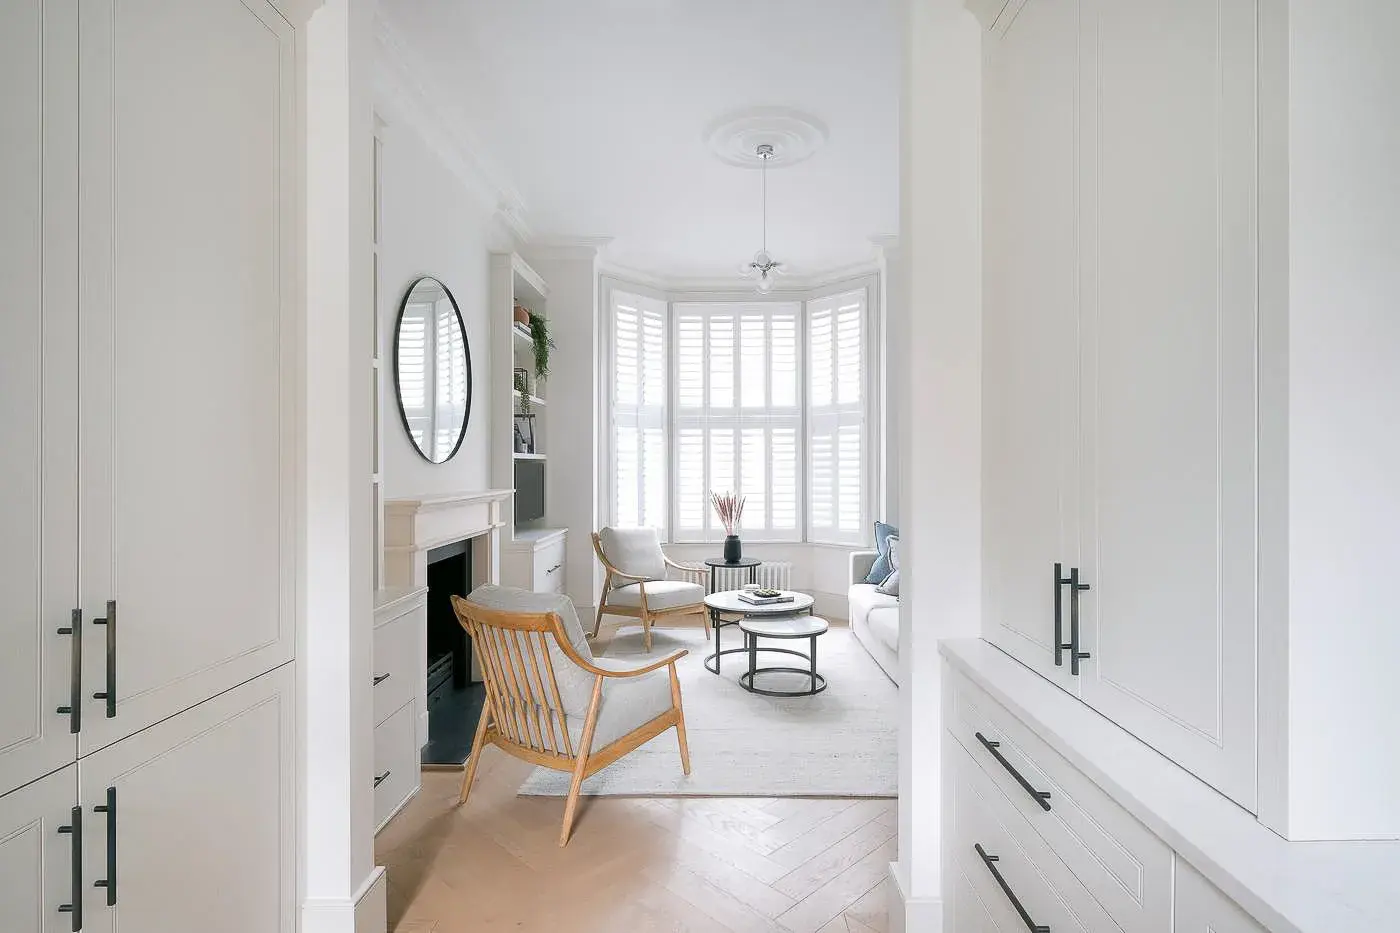 Radnor Walk, holiday home in Chelsea, London